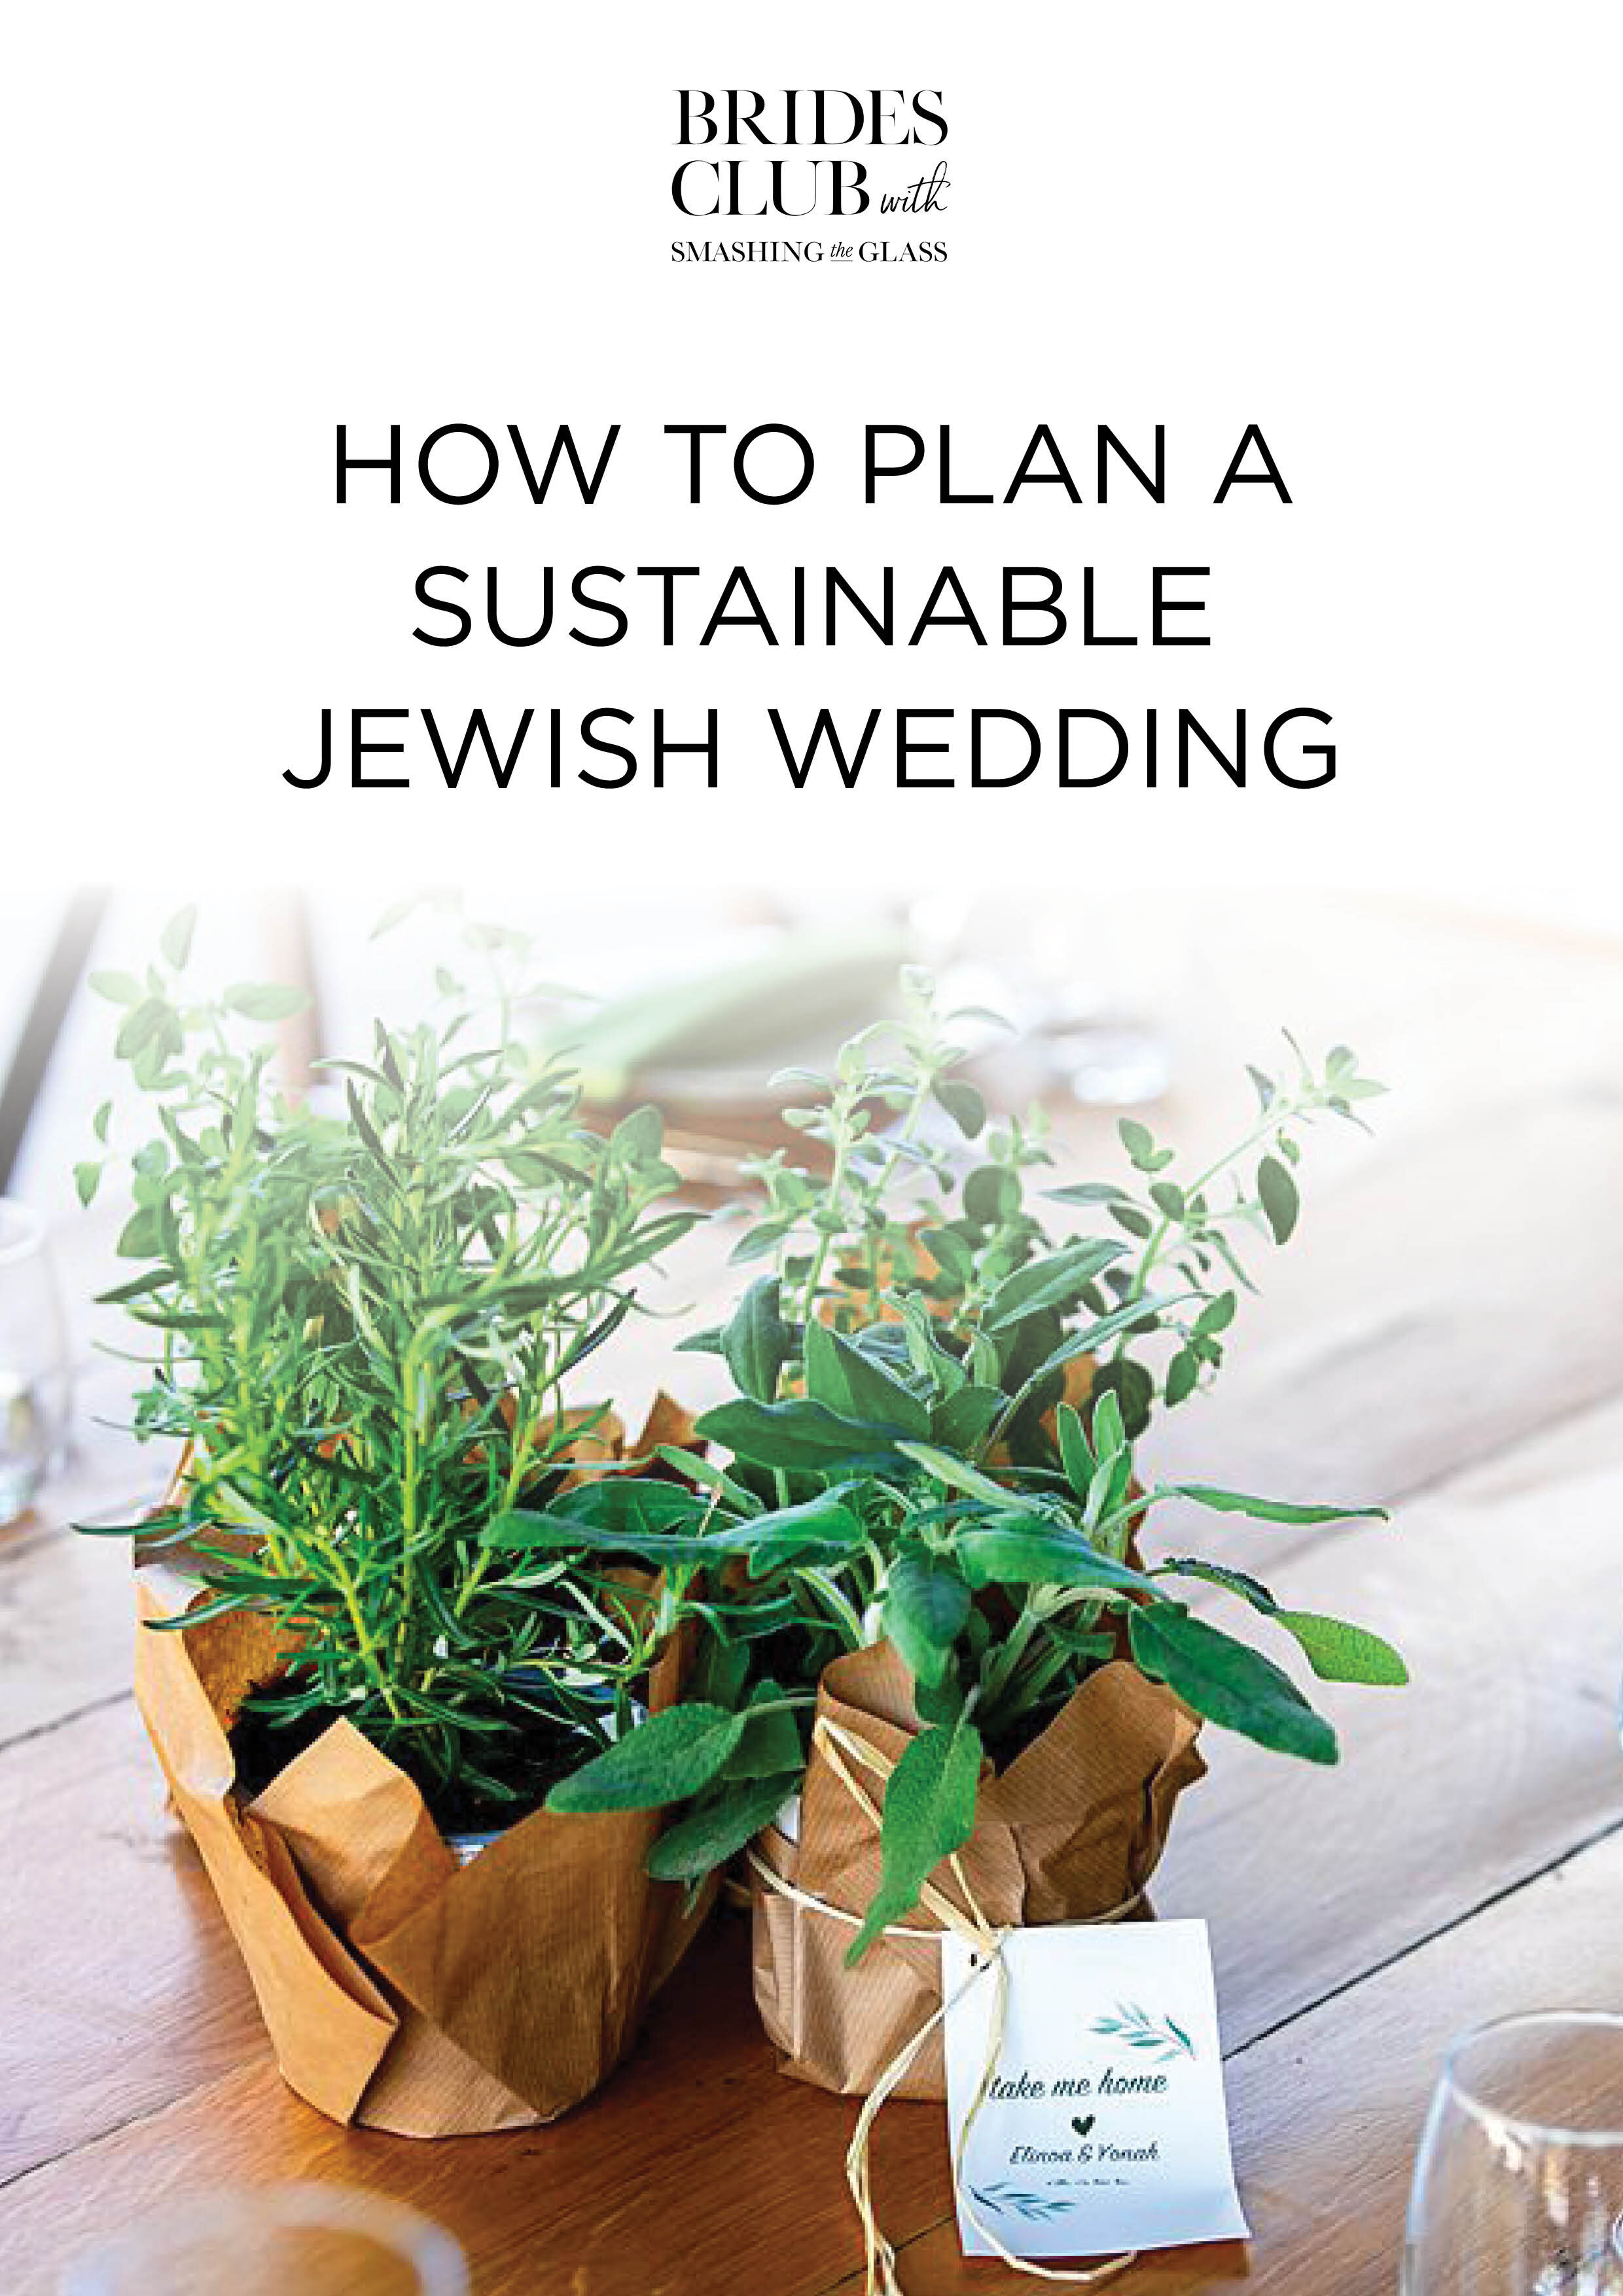 How to Plan a Sustainable Jewish Wedding